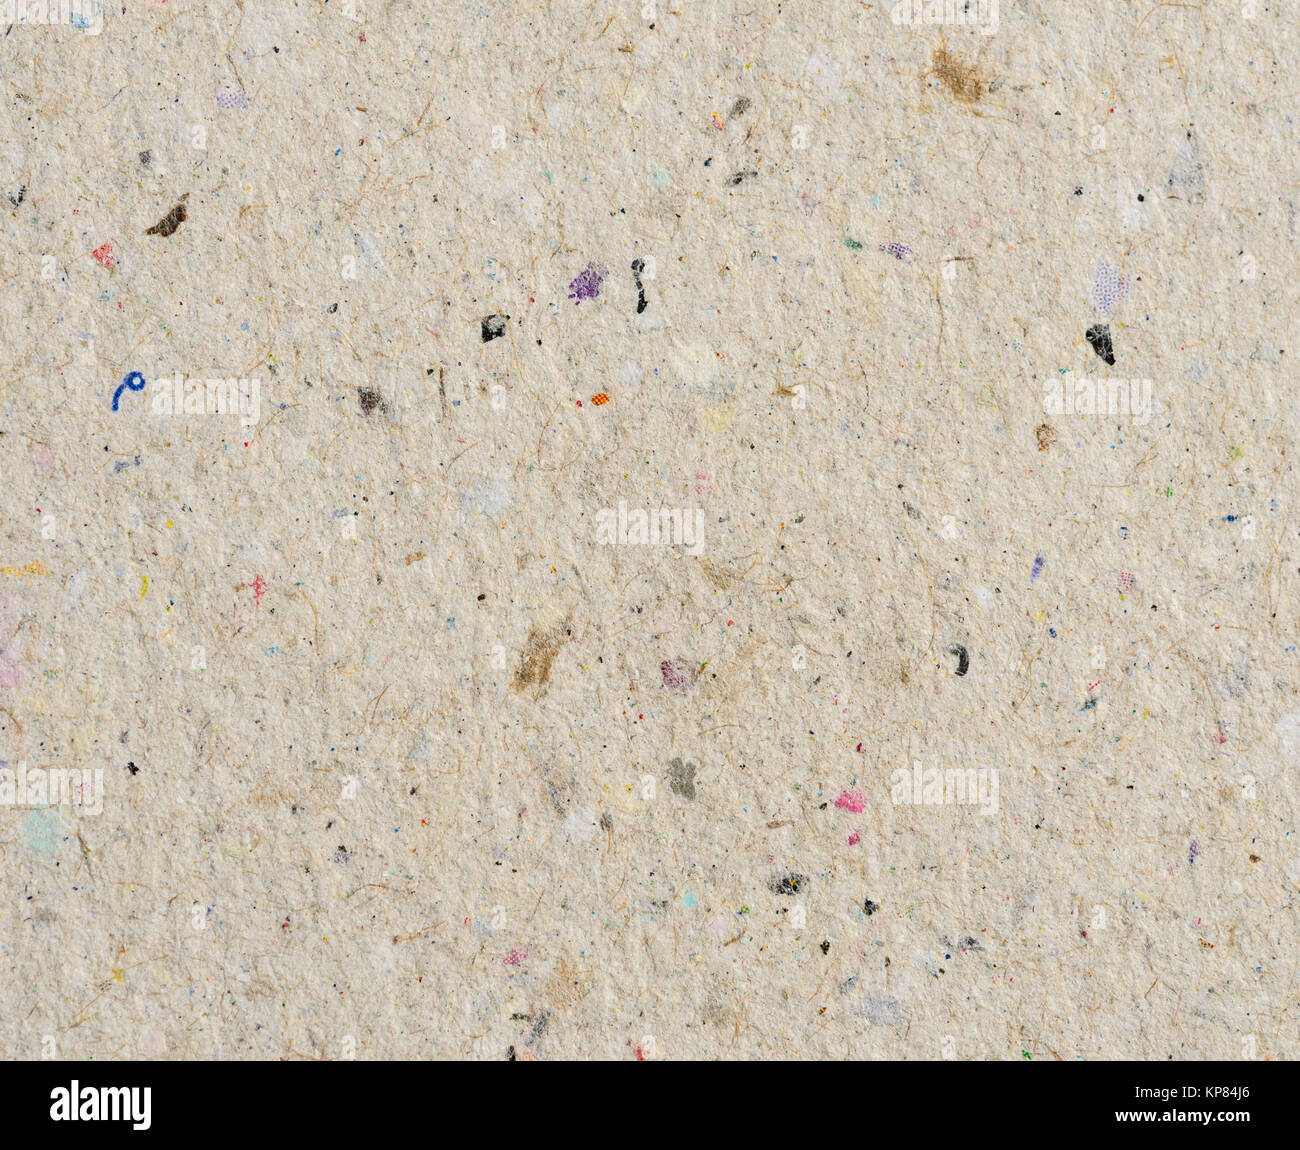 Recycled paper texture background Stock Photo